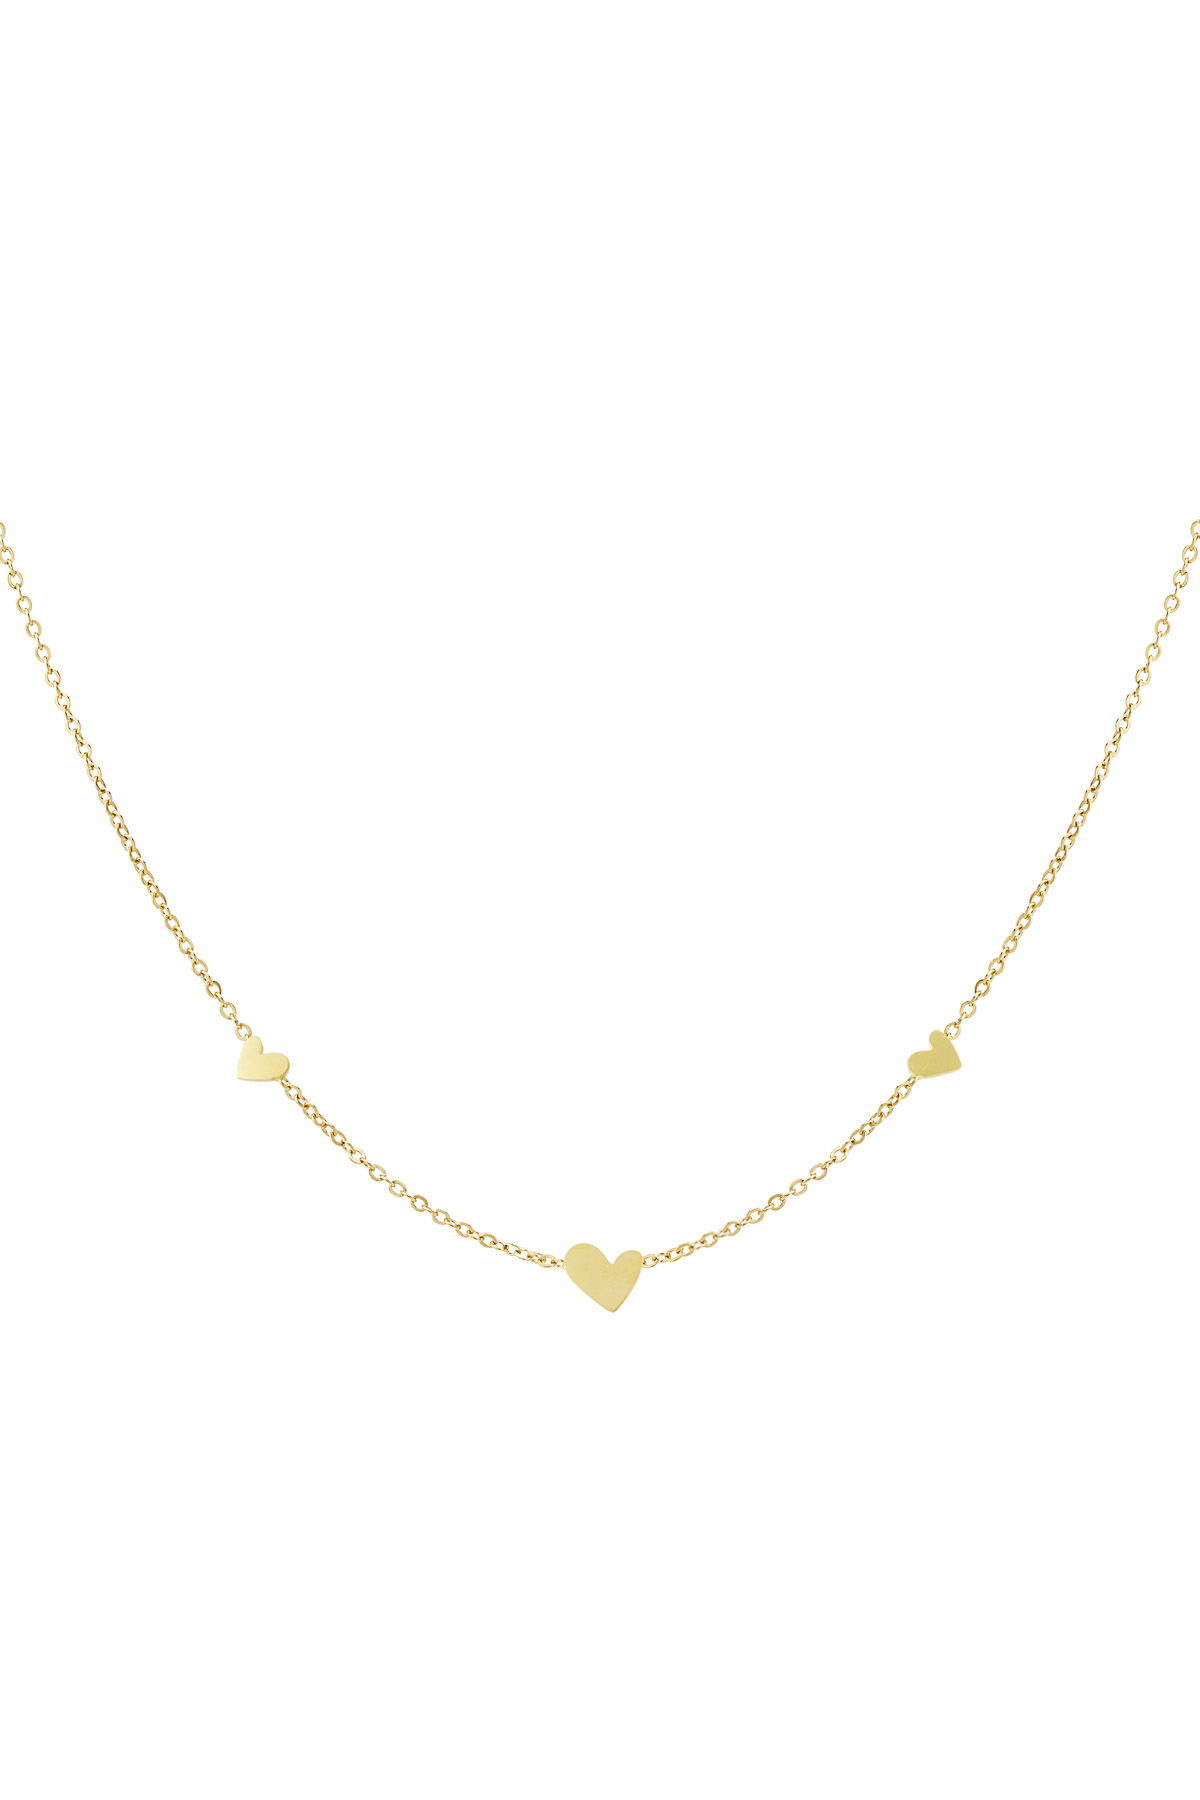 Classic necklace with hearts - gold 